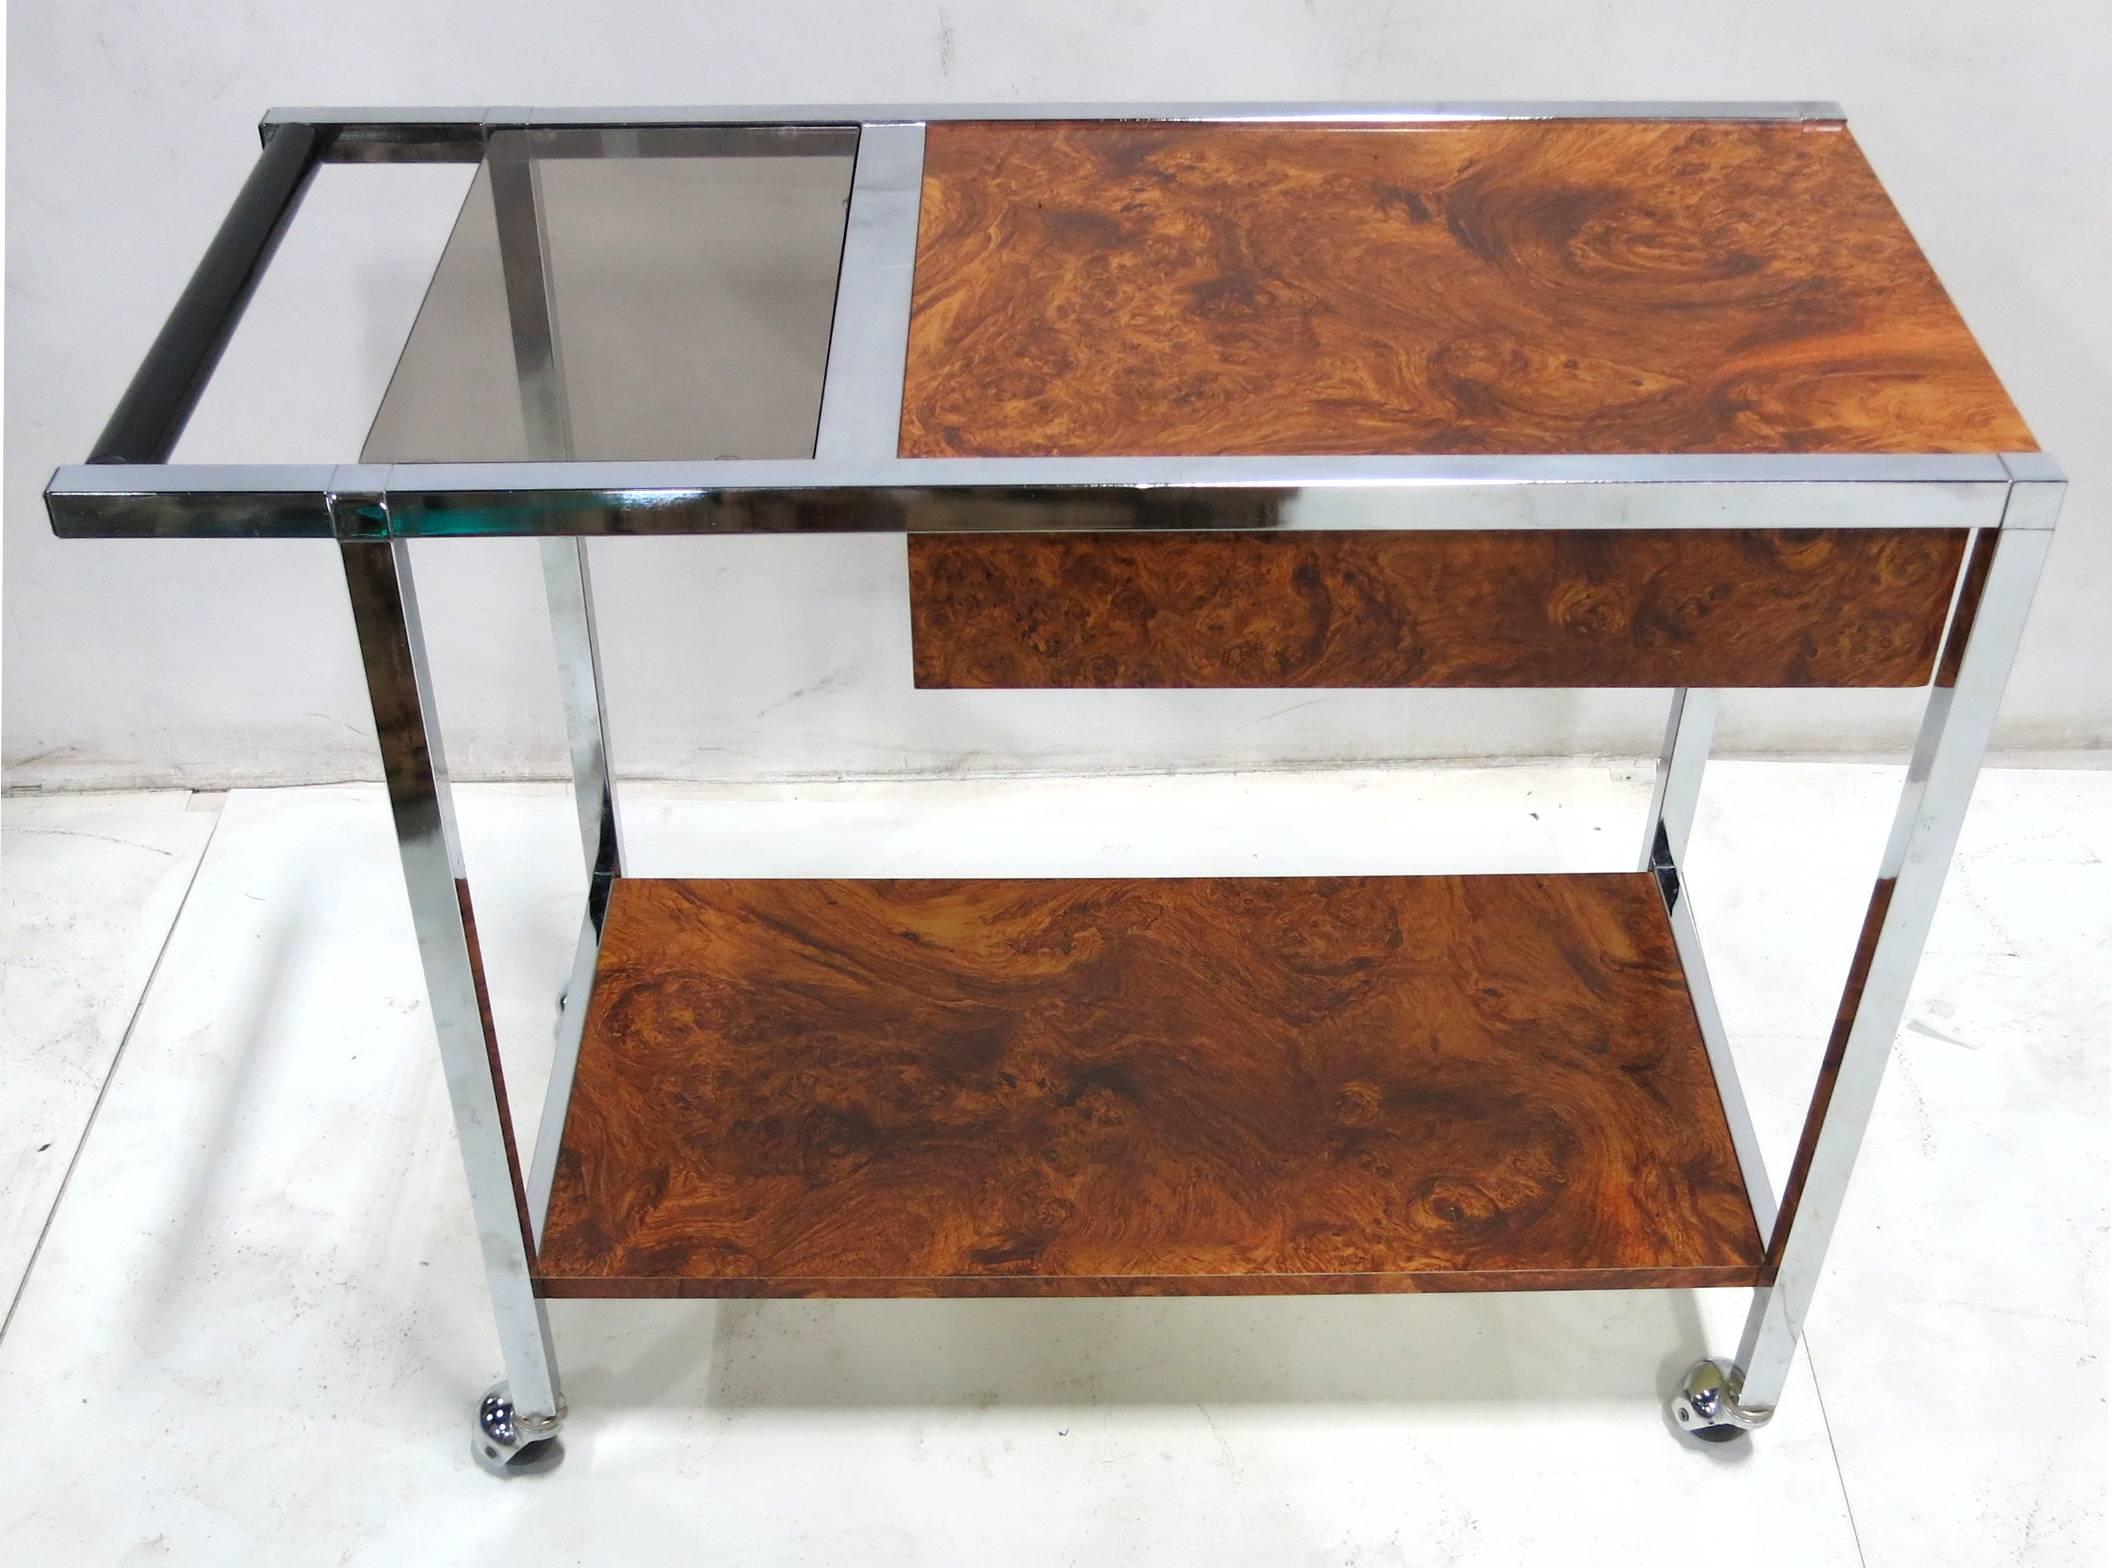 Handsome chrome and burl laminate bar trolley with chrome ball casters. Ebonized wood handle. The cart features a good sized drawer suspended from the underside of the chrome bordered top. Very nice quality materials and workmanship.